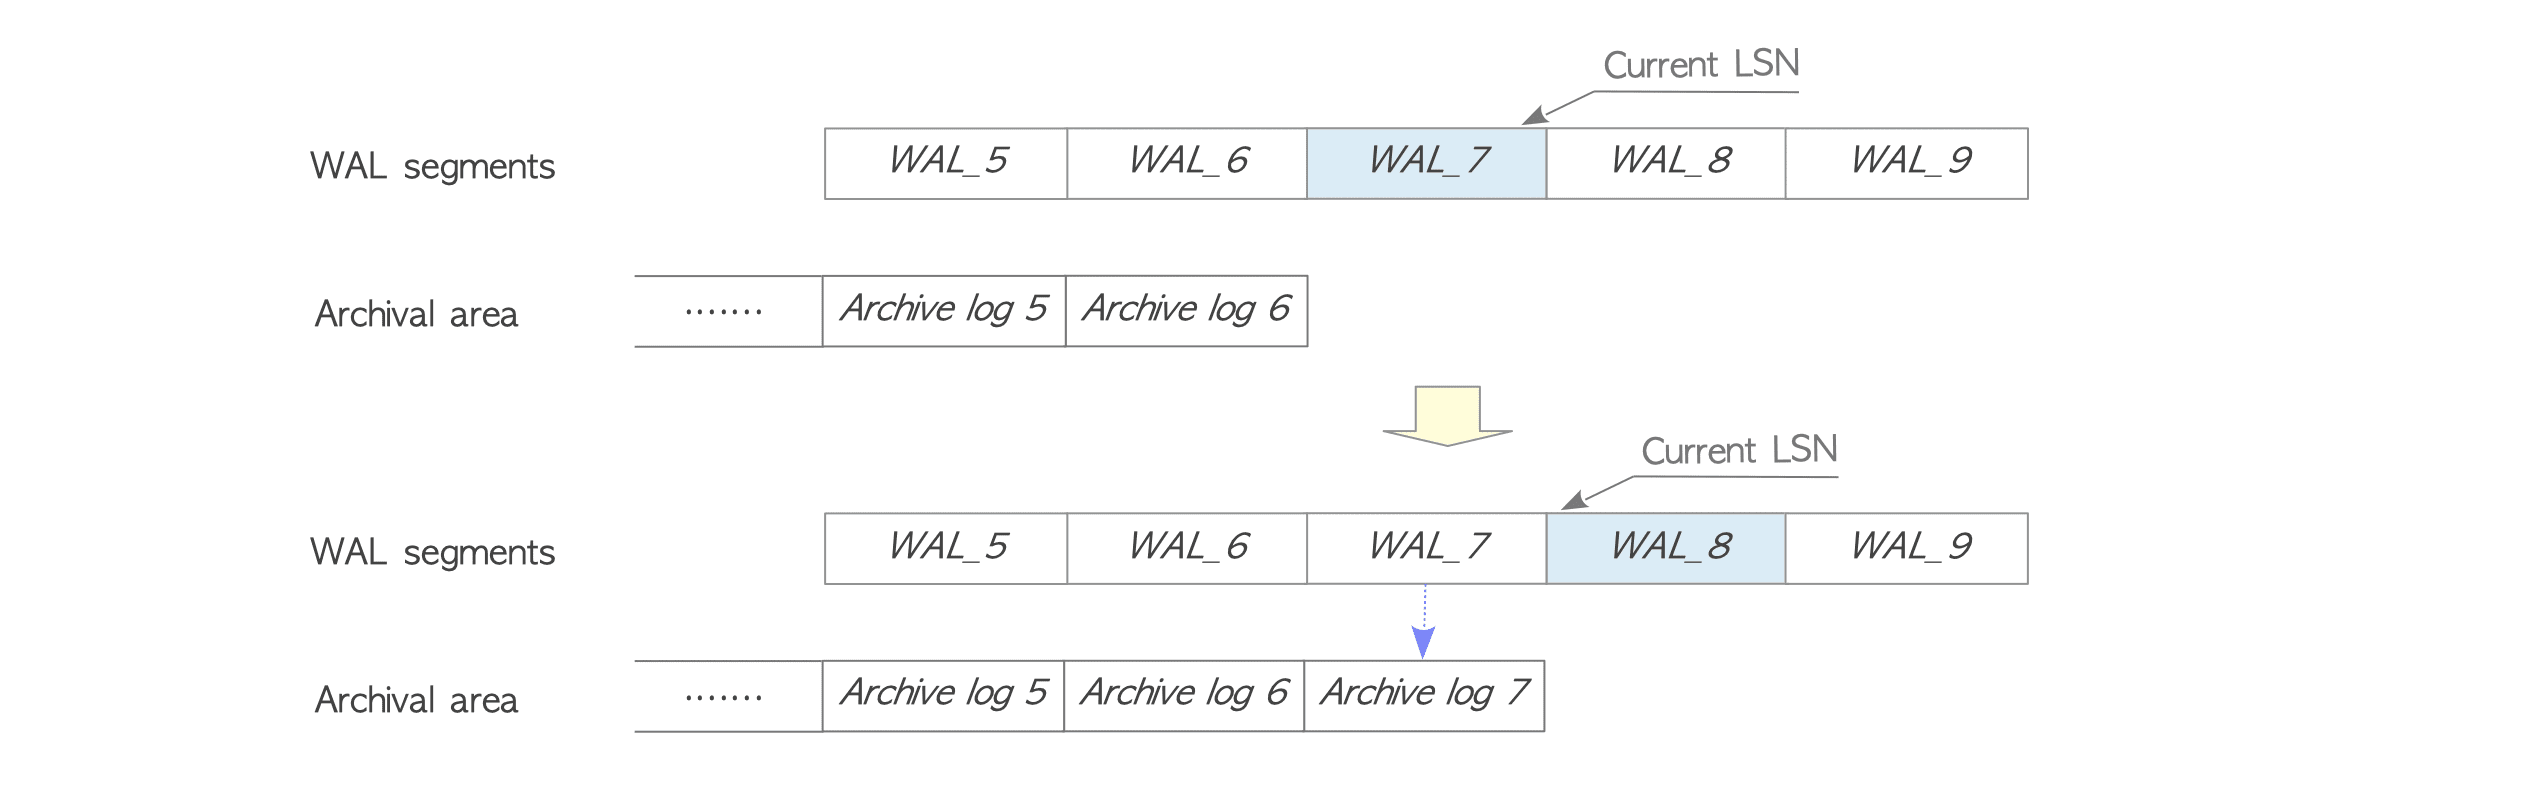 When the WAL segment file WAL_7 is switched, the file is copied to the archival area as Archive log 7.